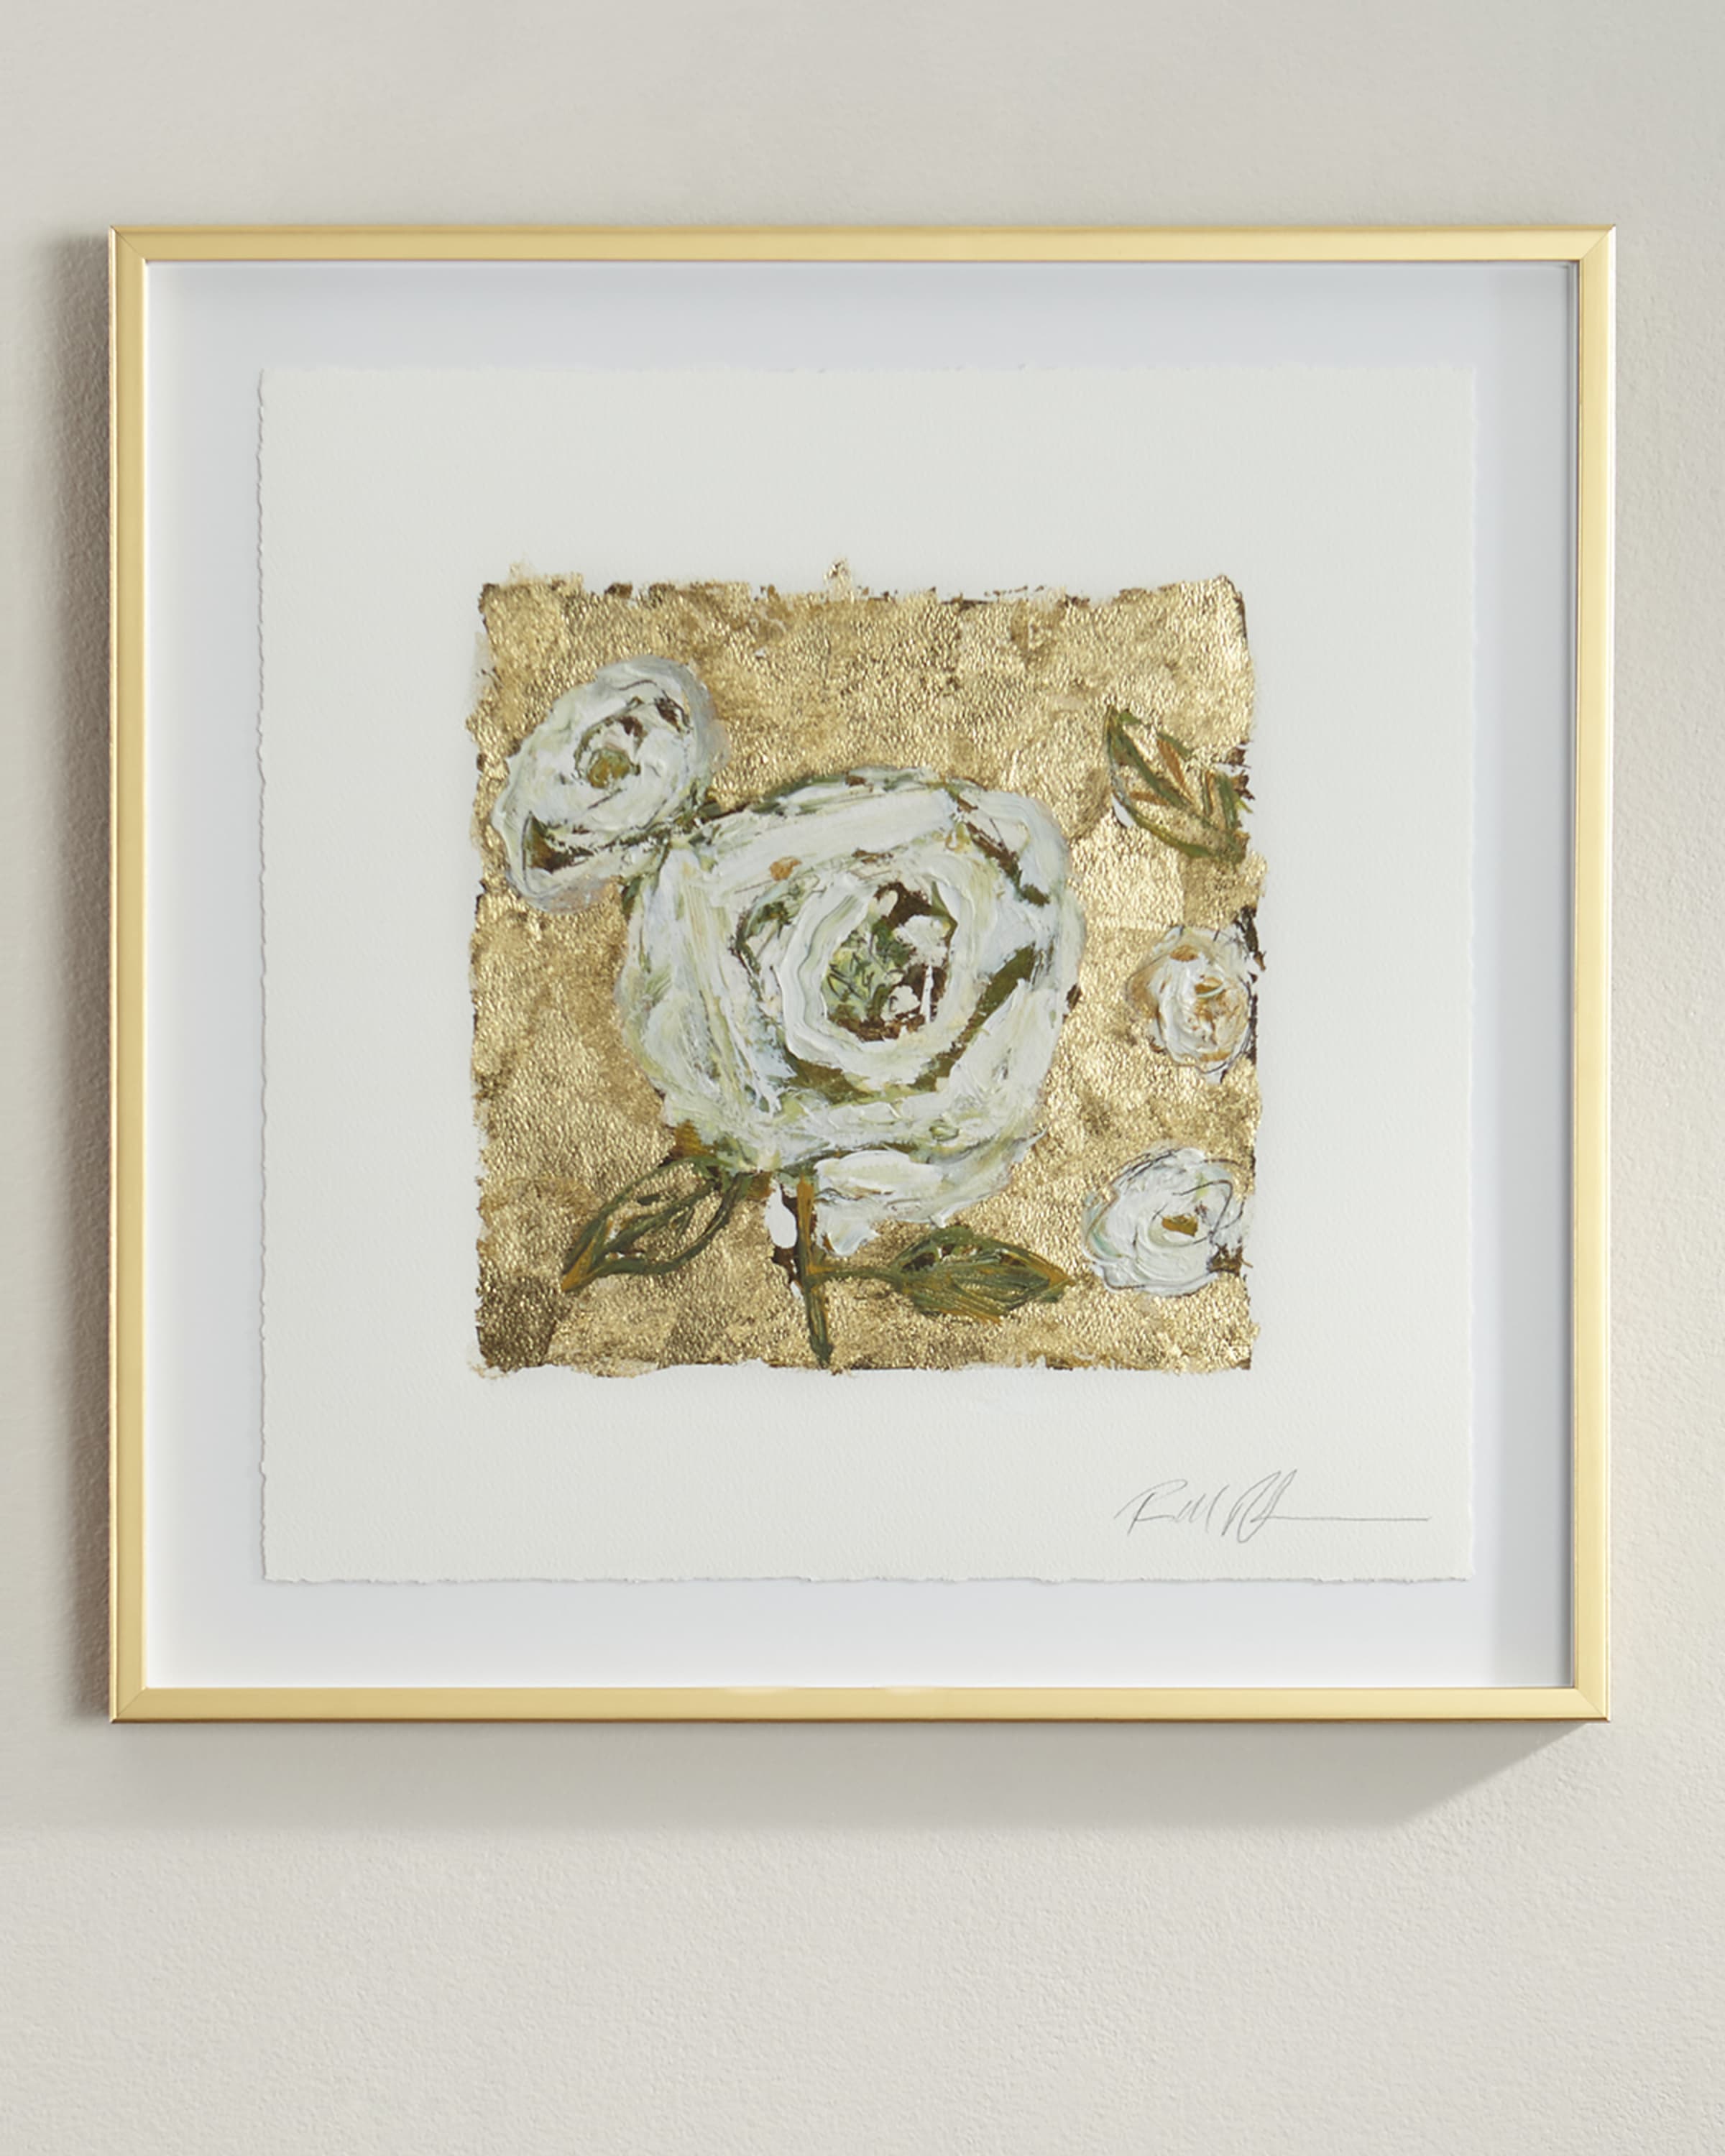 RFA Fine Art "Gold and Roses" Giclee on Paper Wall Art